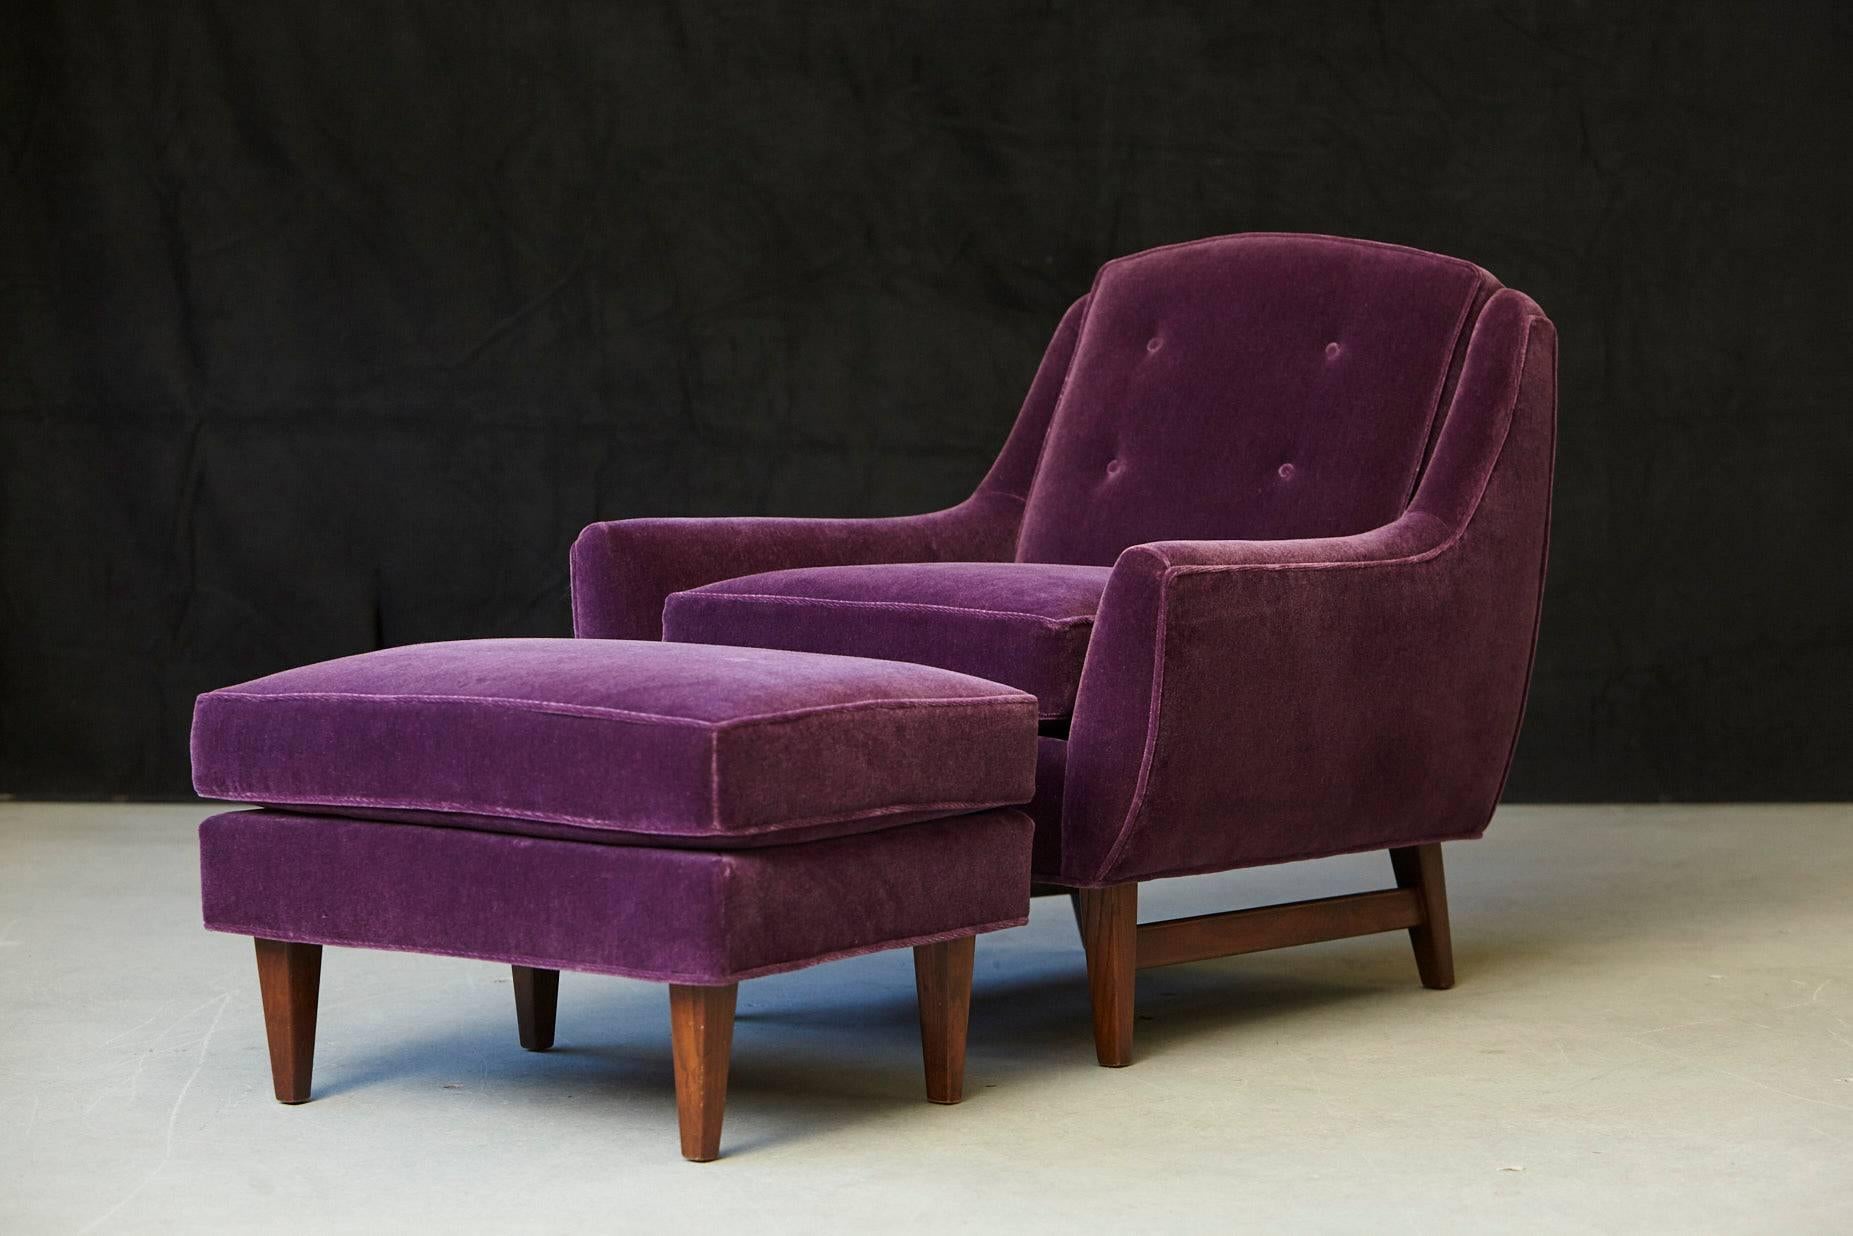 Beautiful Adrian Pearsall lounge and matching ottoman upholstered in purple mohair, in excellent condition.
Dimensions: 
Lounge chair W 29 in x H 31 in x D 32 in, seat depth 21 in, seat height 17.5 in
Ottoman W 25 in x D 19 in x H 16 in.